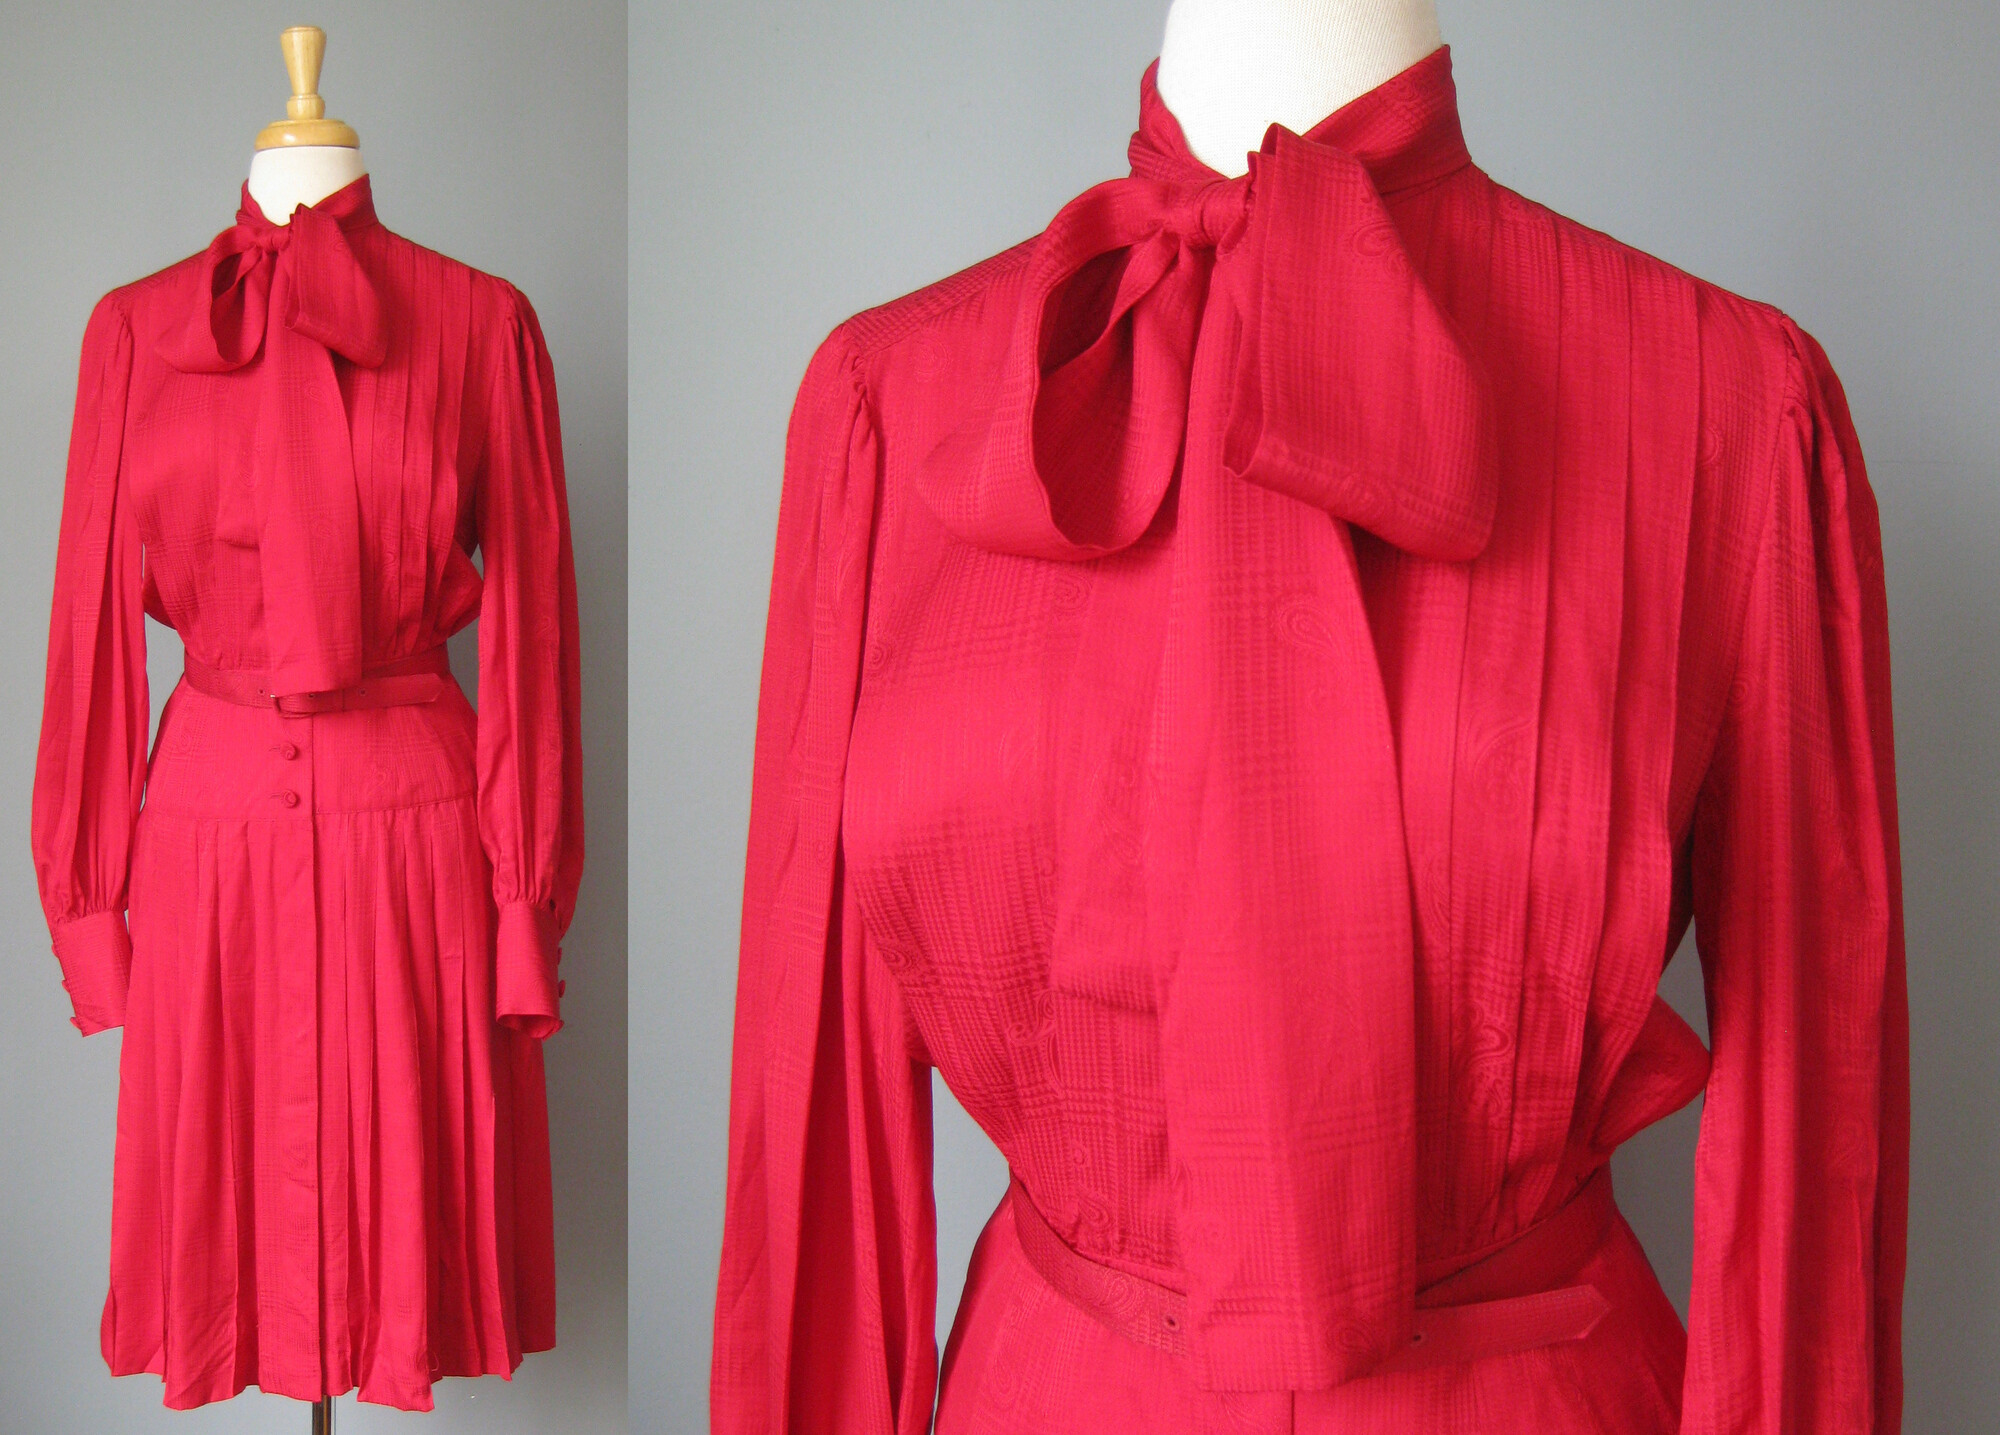 Here is a pretty red silk paisley jacquard secretary dress from the 1980s.
by Adele Simpson, made in Hong Kong with high end dressmaker details
High neck with sash bow tie.
Dropped waist
Matching belt
interior waist stay
Full skirt and puffy sleeves
Unlined
Long sleeves

Flat measurements:
Shoulder to shoulder: 14.75
armpit to armpit: 20
Waist: 13
Hip: up to 20
Length: 42
Underarm sleeve seam: 18 (sleeve buttons at the end)

perfect condition!

Thanks for looking!
#42921